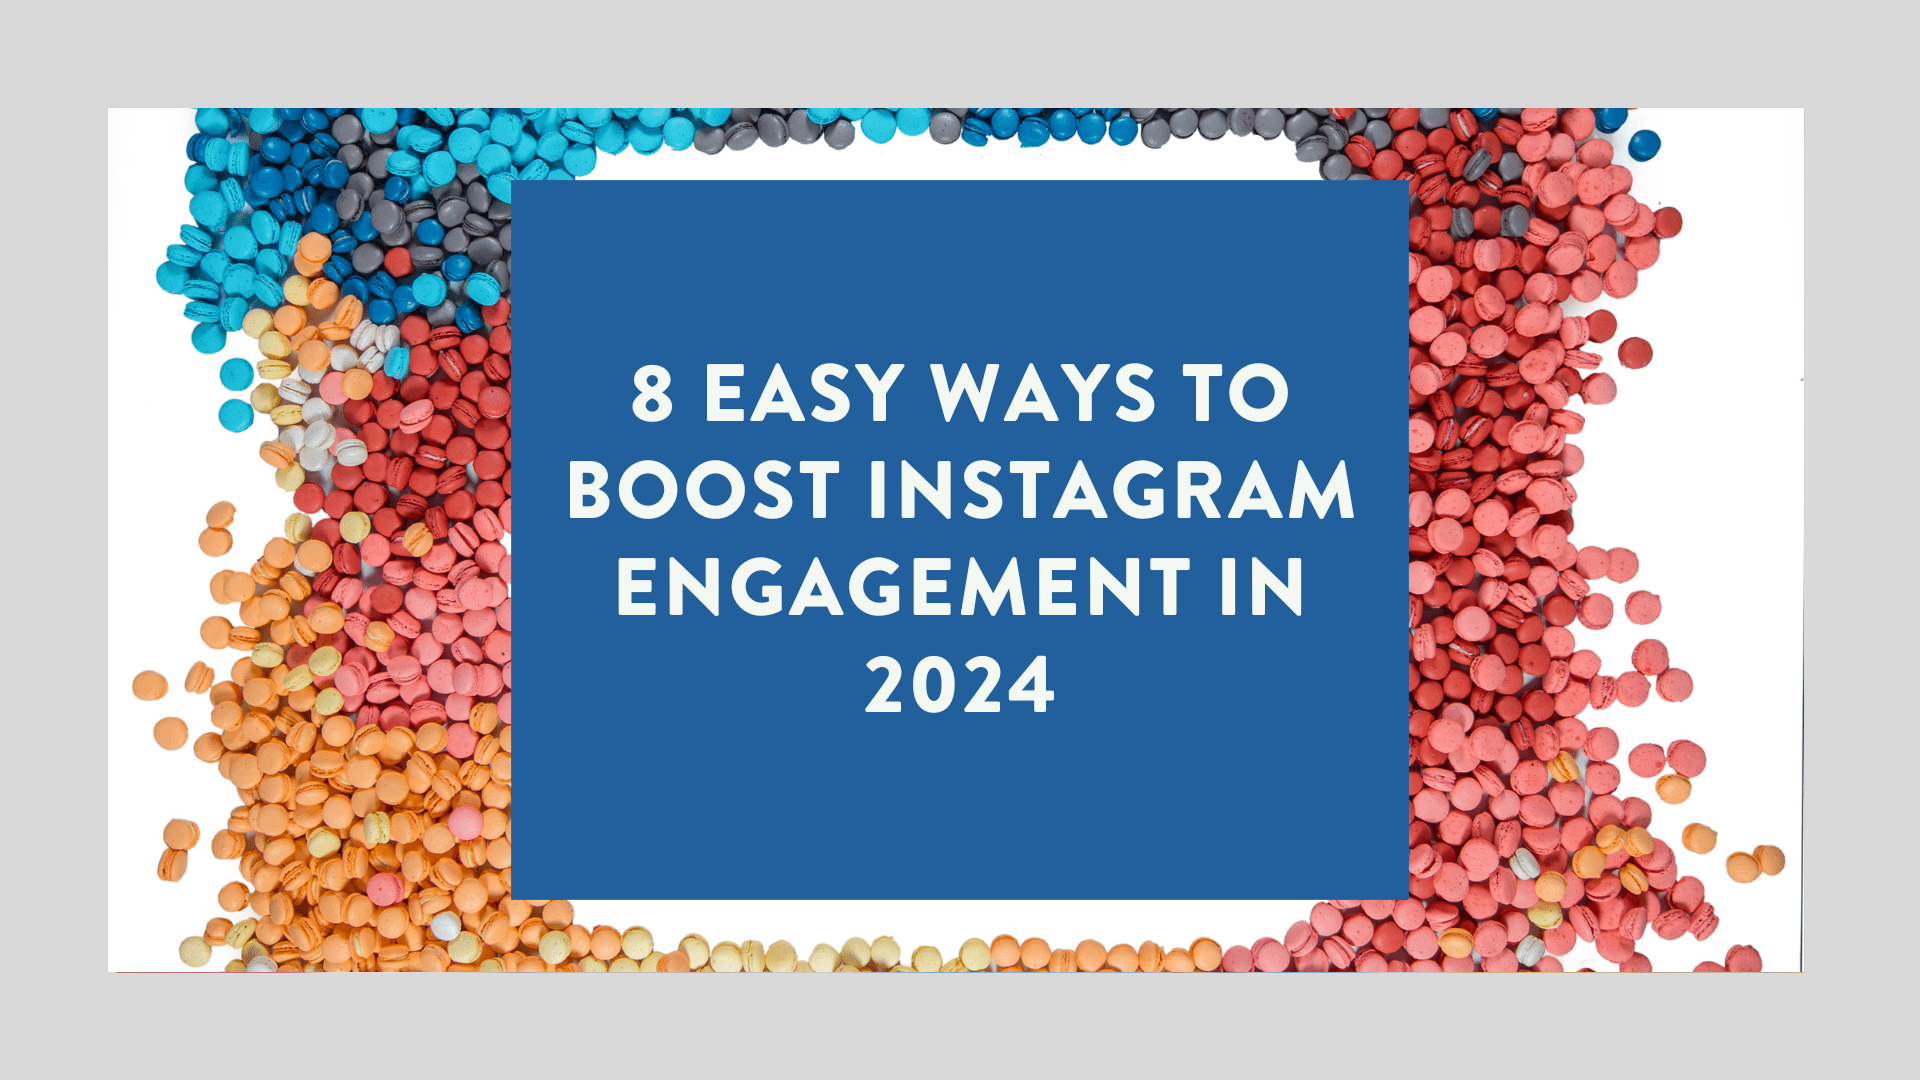 8 Easy Ways to Boost Instagram Engagement in 2024